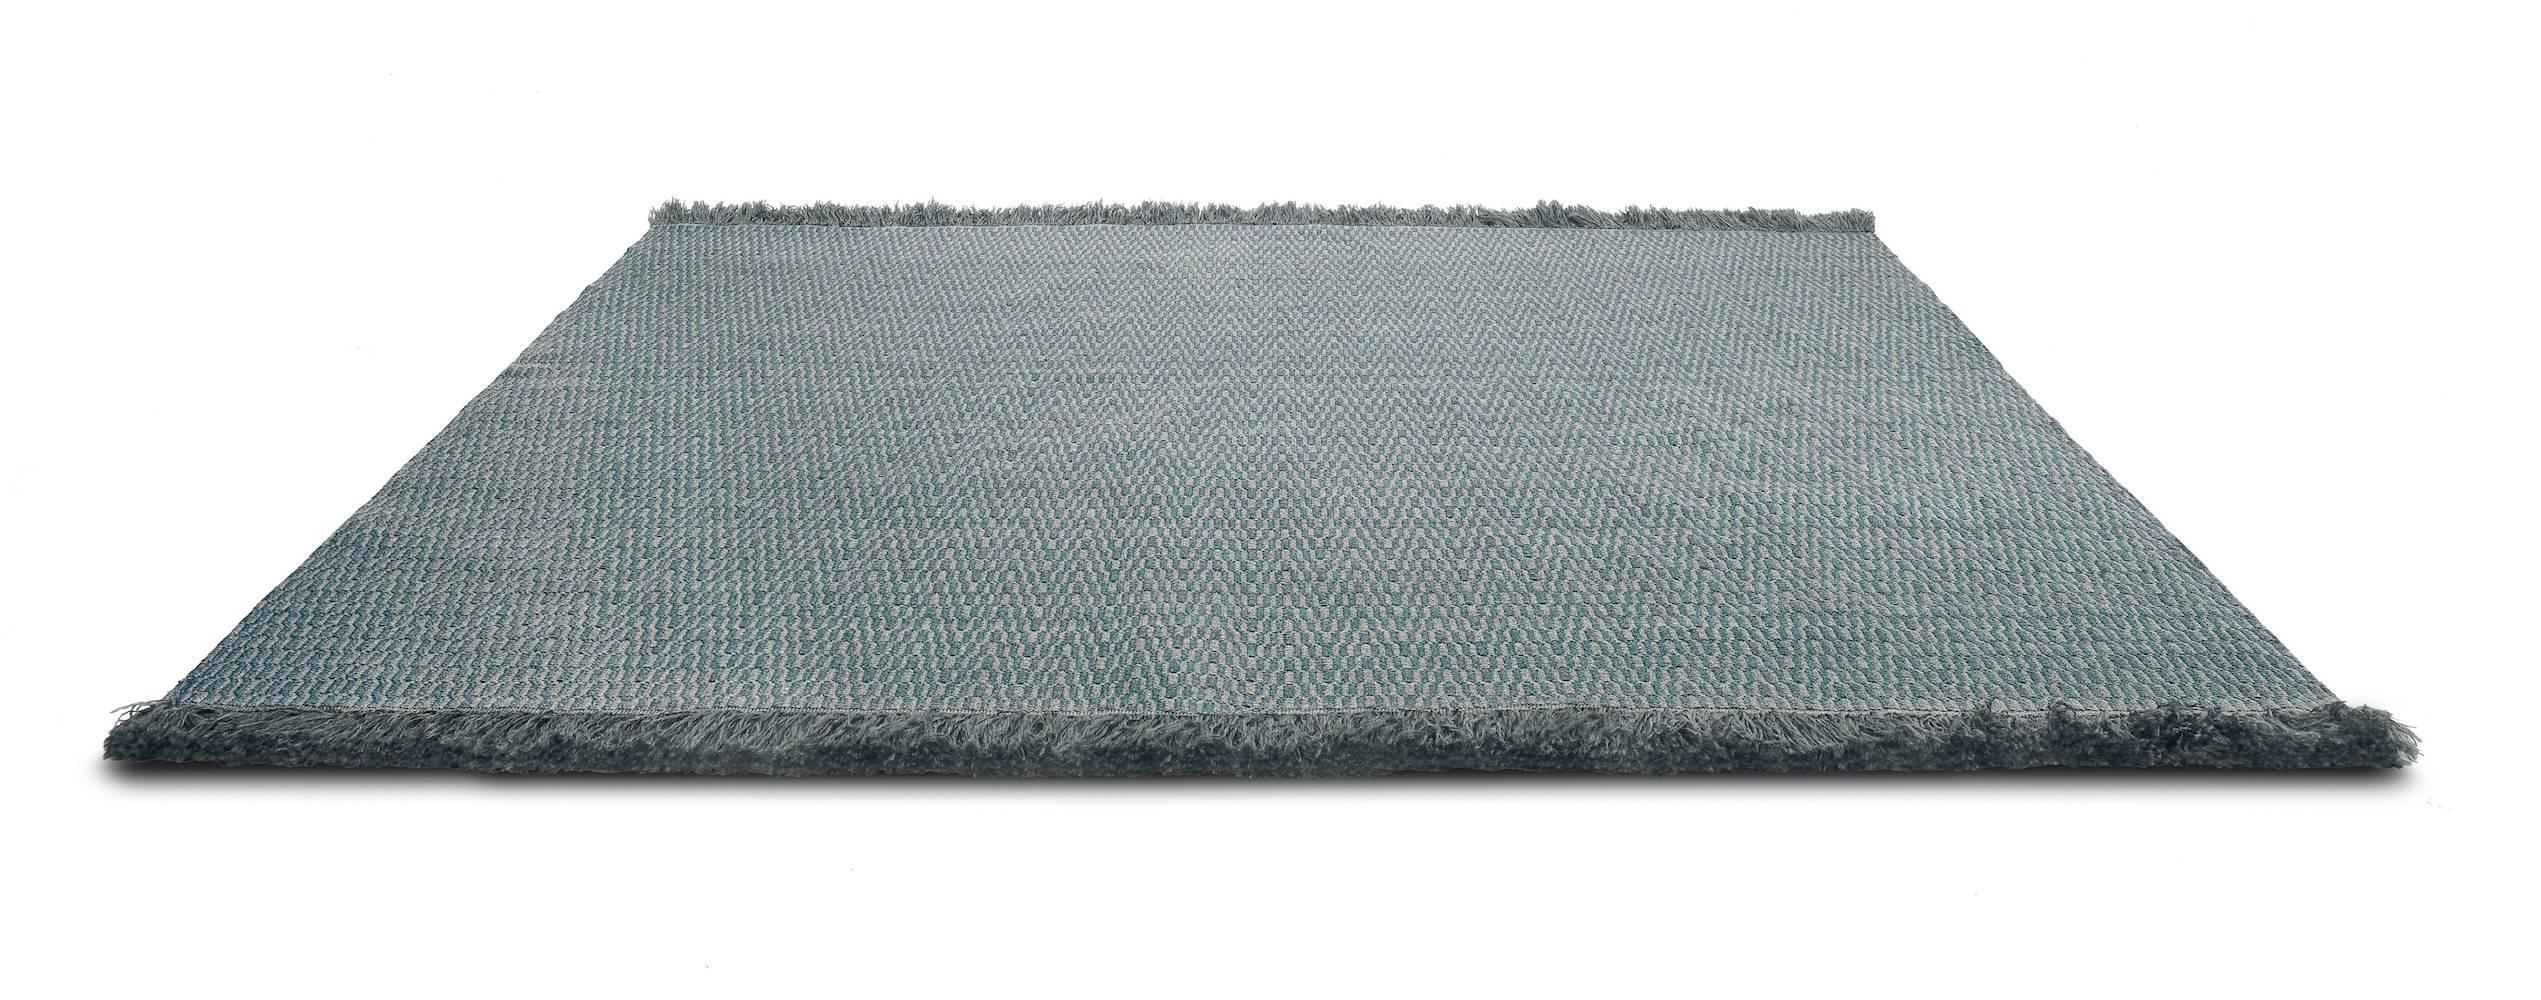 Modern Babylon Outdoor Carpet in Three Possible Color Combinations by Roda For Sale